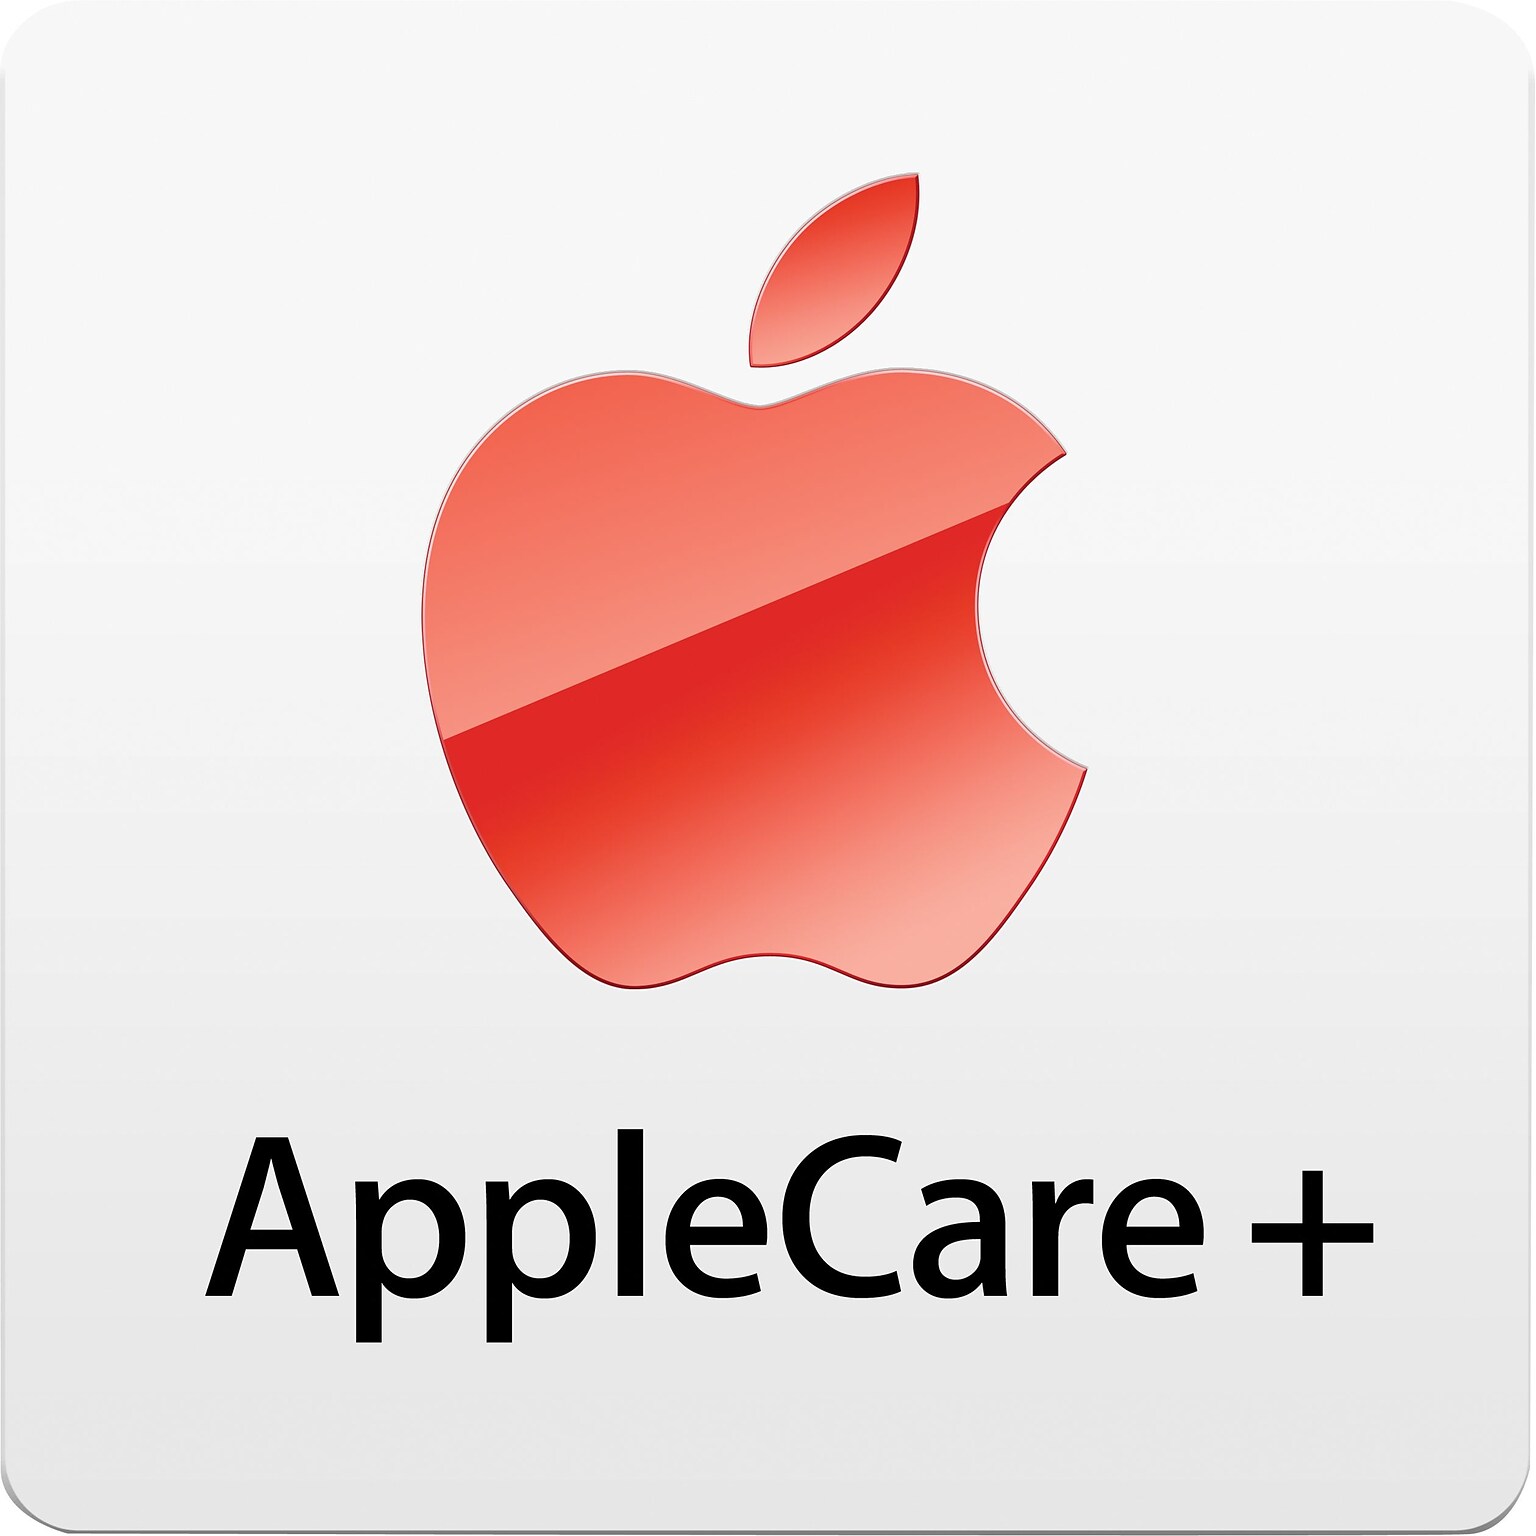 AppleCare+ 2-year Protection Plan for iPad Air with Retina Display, Wi-Fi + Cellular (Verizon Wireless) 64GB, Silver